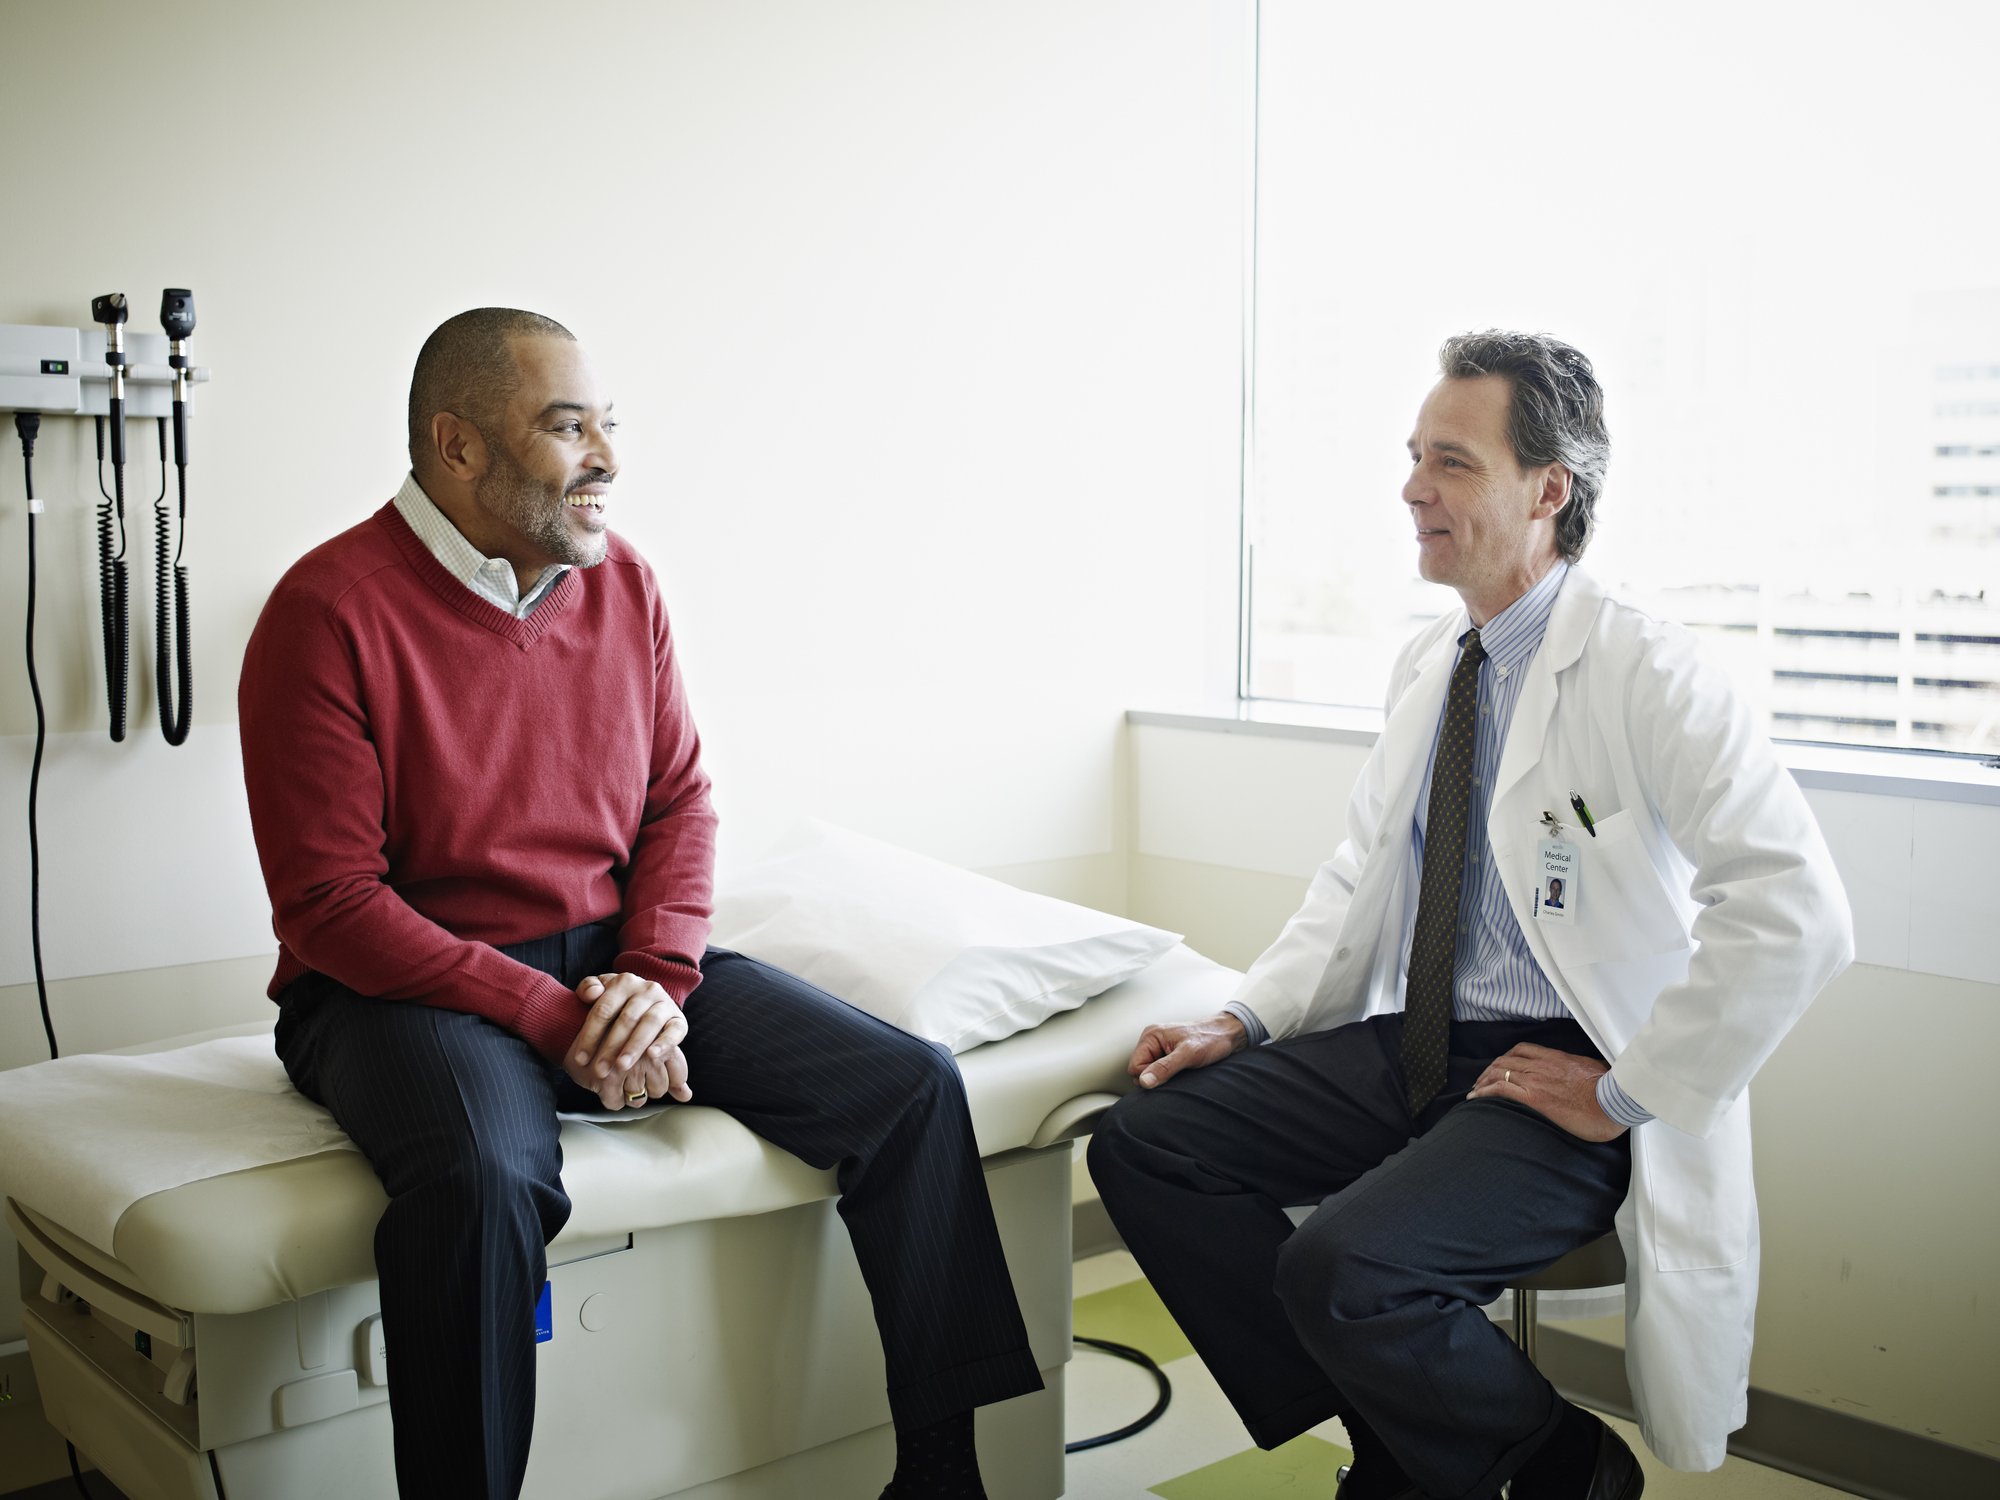 Mature male patient sitting on exam table  in discussion with doctor in exam room